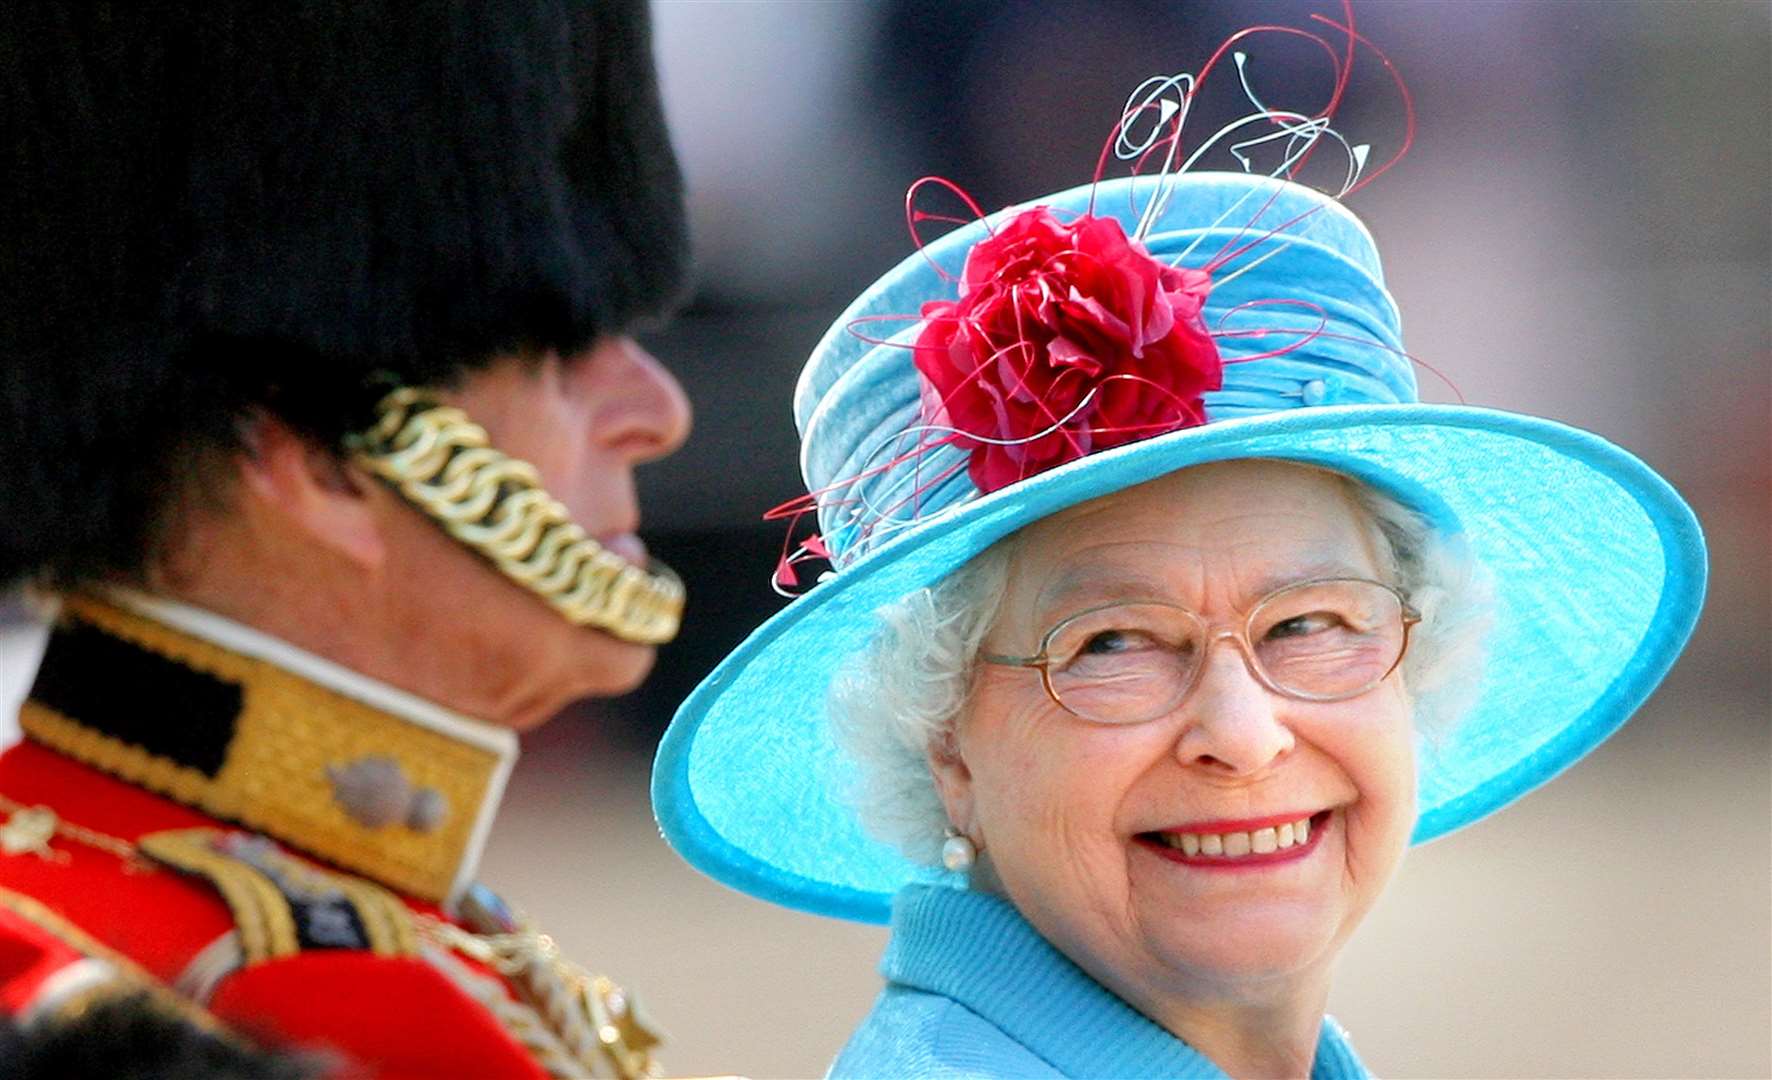 The Queen smiling at the Duke of Edinburgh on Horse Guards Parade during the annual Trooping the Colour parade (PA)